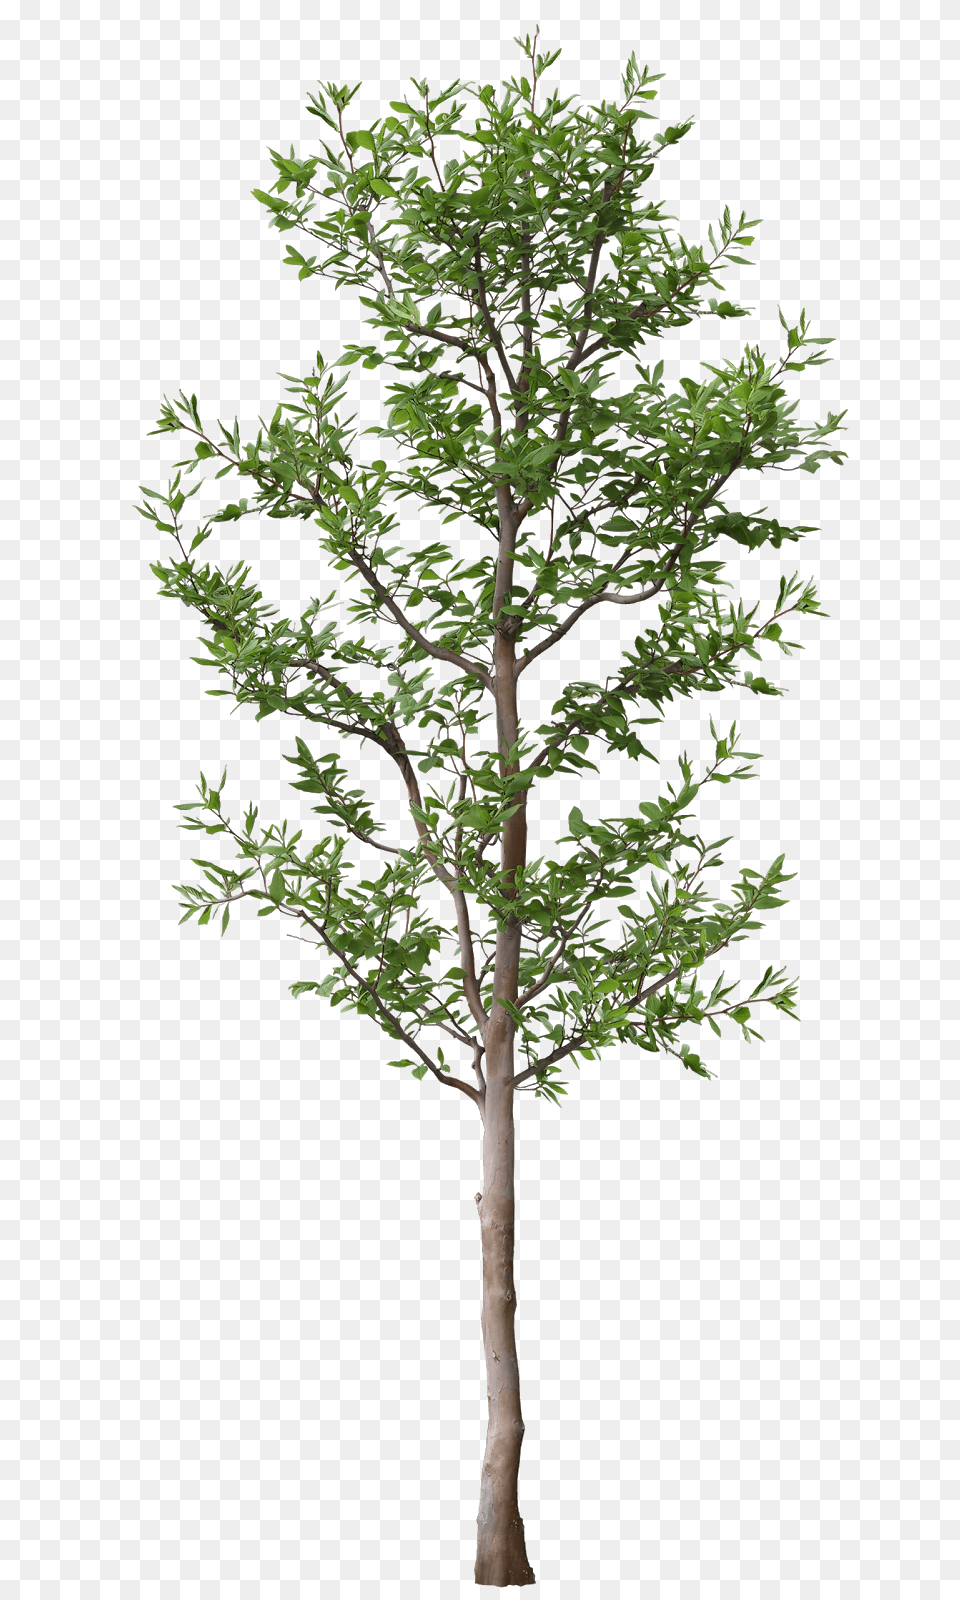 Arbol Tree For Architectural Rendering, Plant, Potted Plant, Tree Trunk, Leaf Free Transparent Png